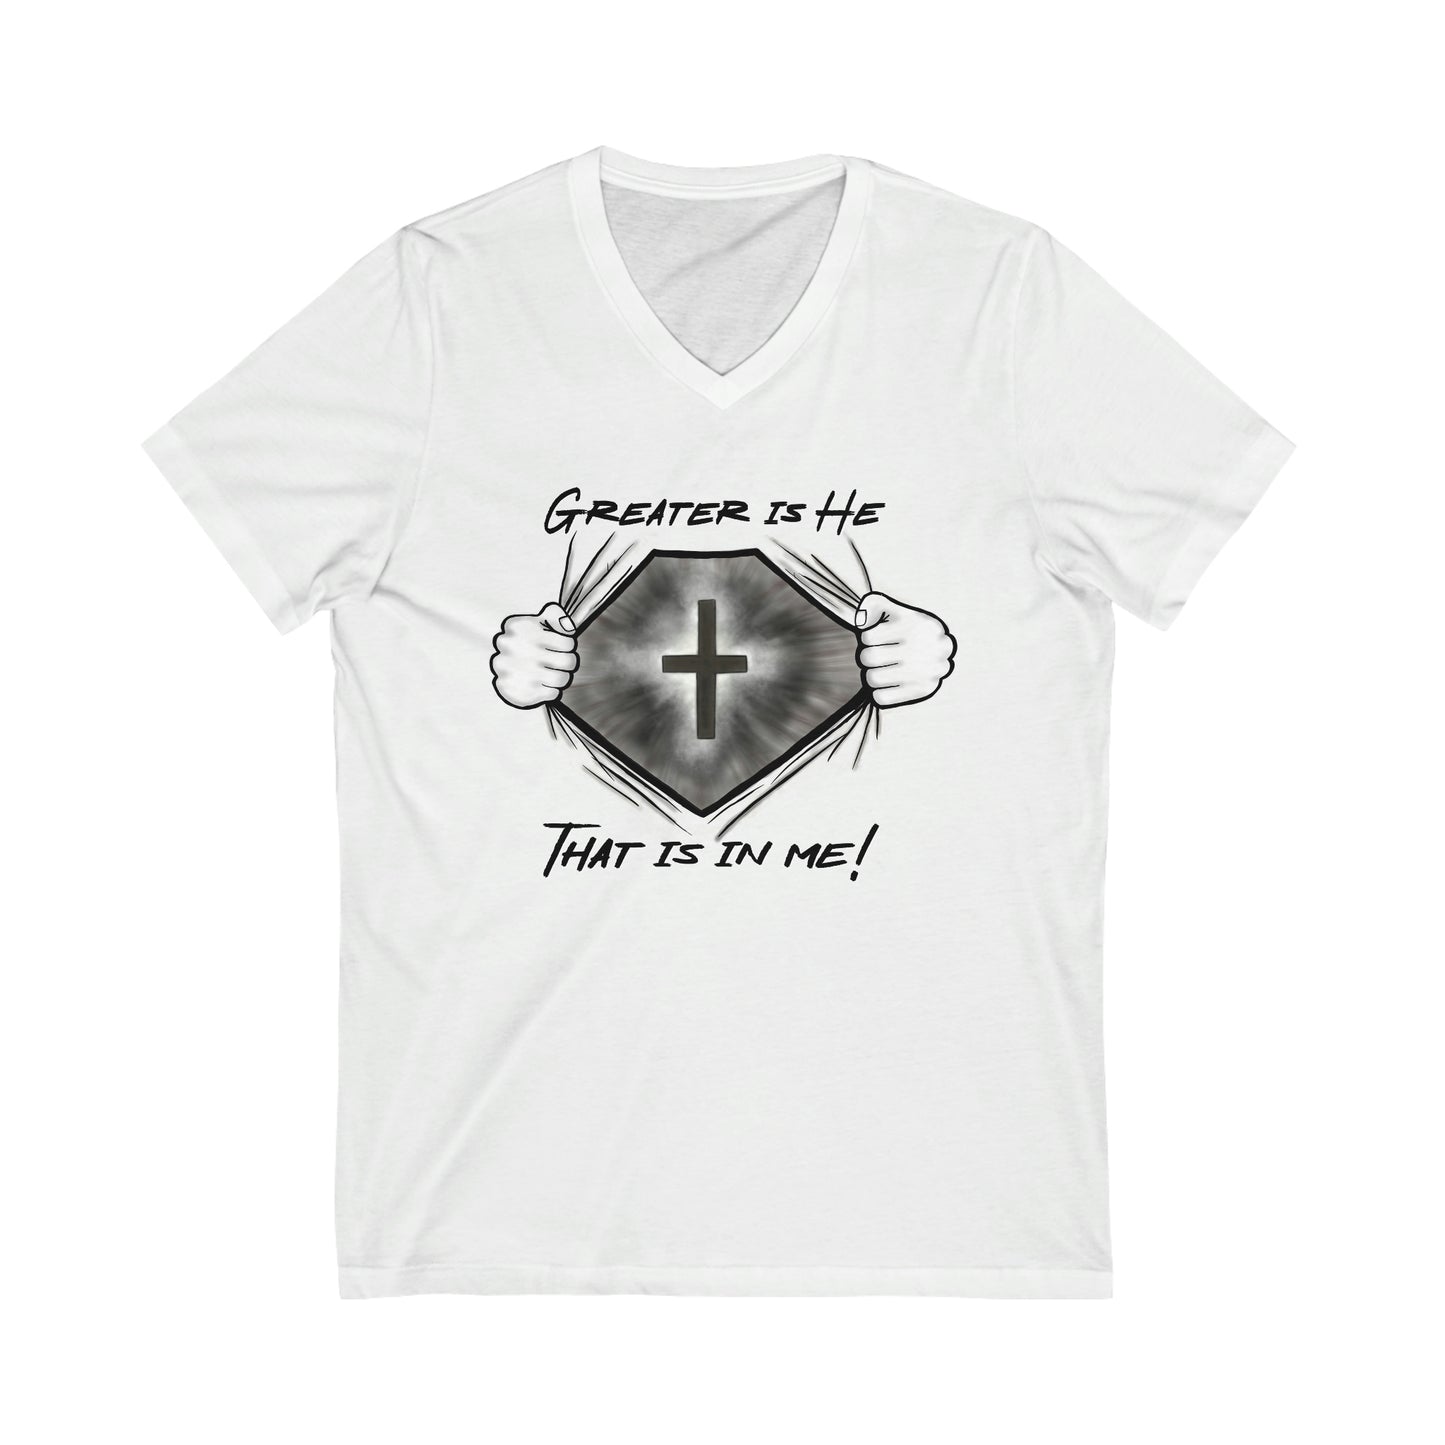 Greater Is He That Is In Me!- (Available in more colors)